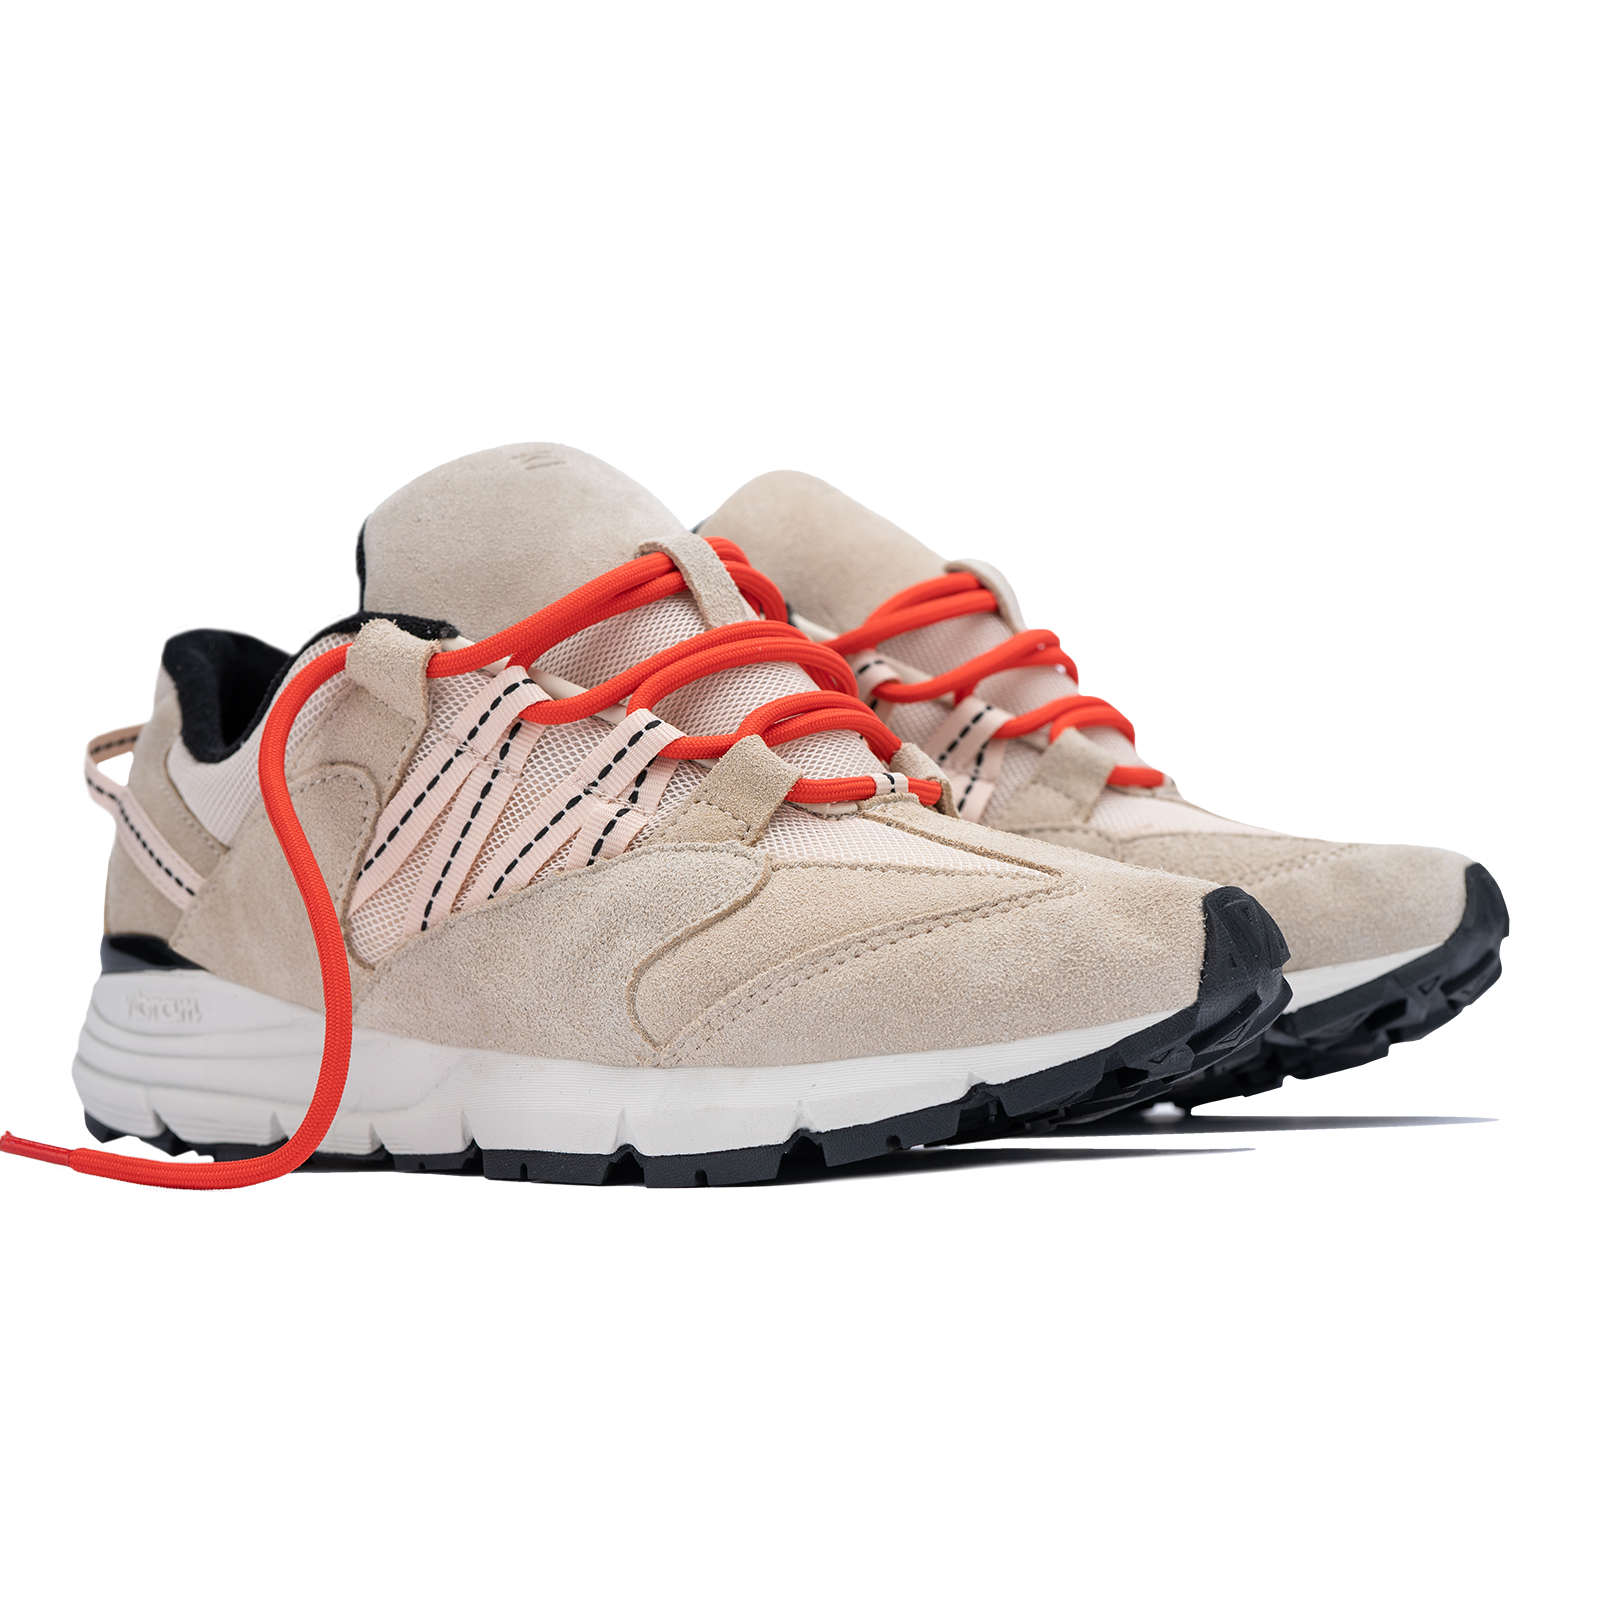 Altiutude / Safari front 3/4 view khaki suede / air mesh / webbing lace holder with orange lace on a vibram sole